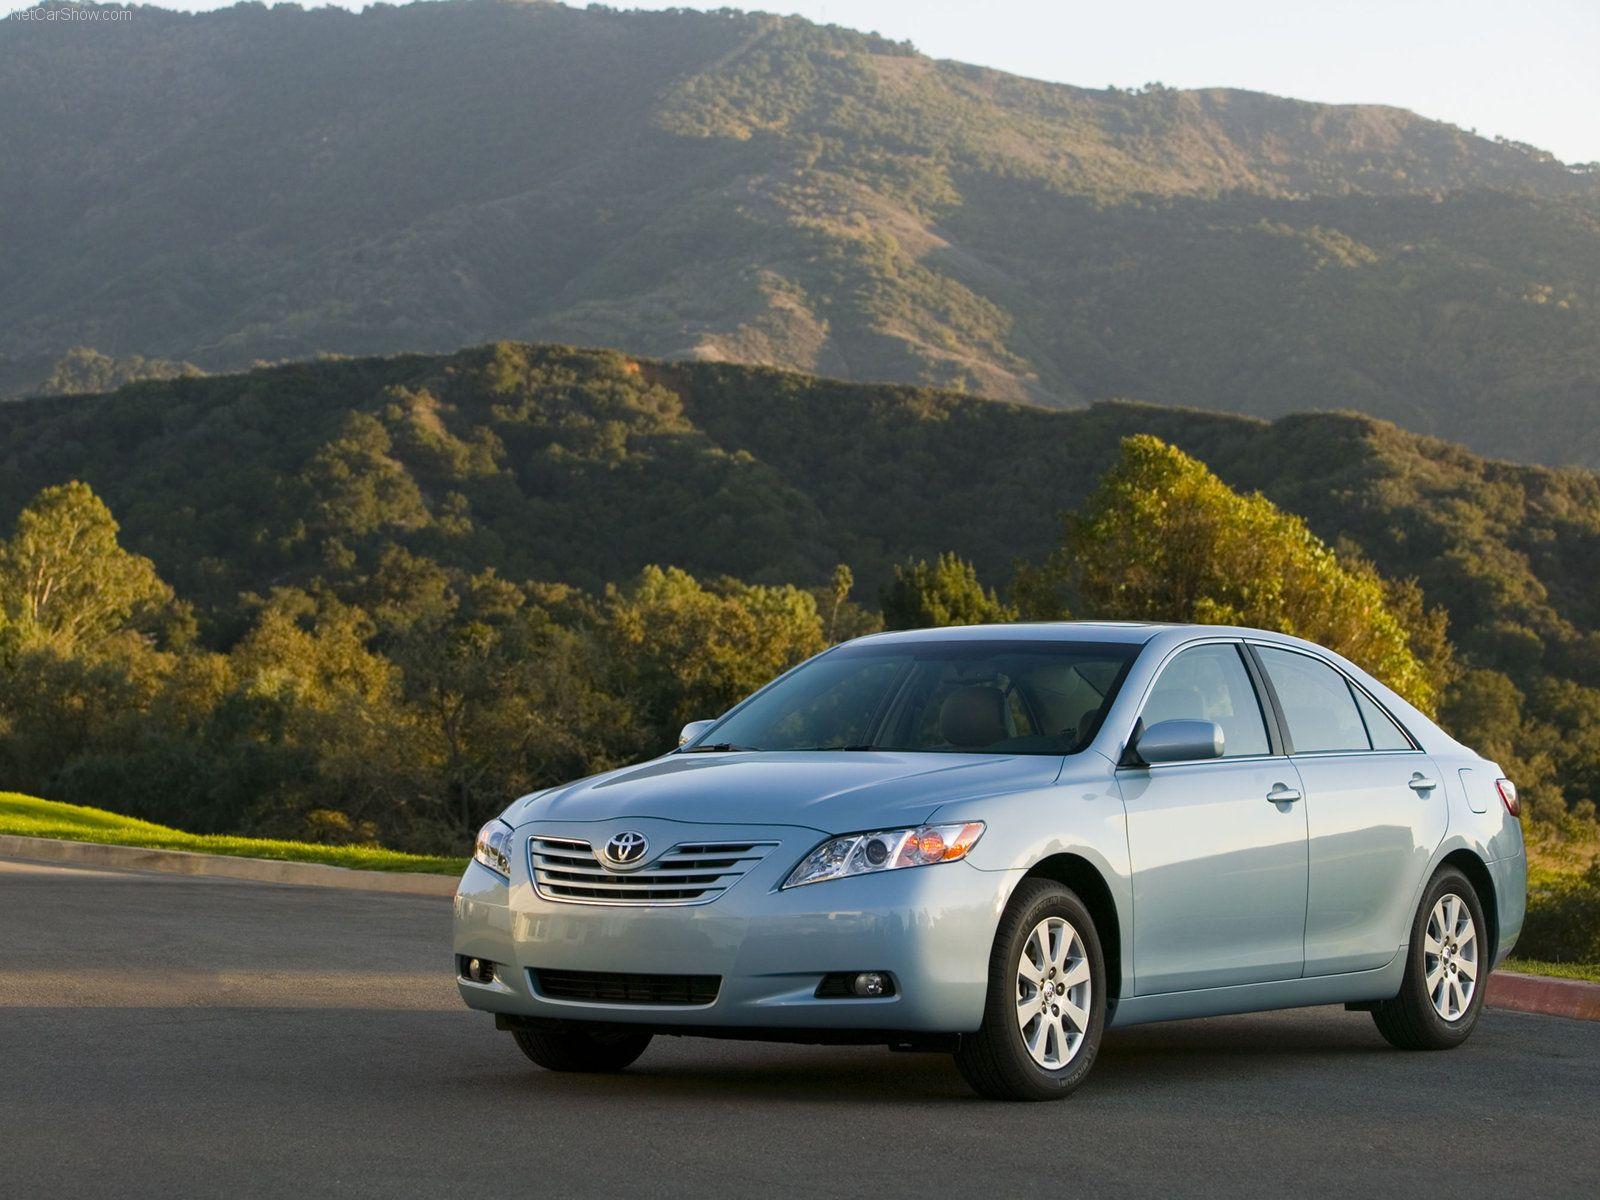 Toyota Camry Wallpapers